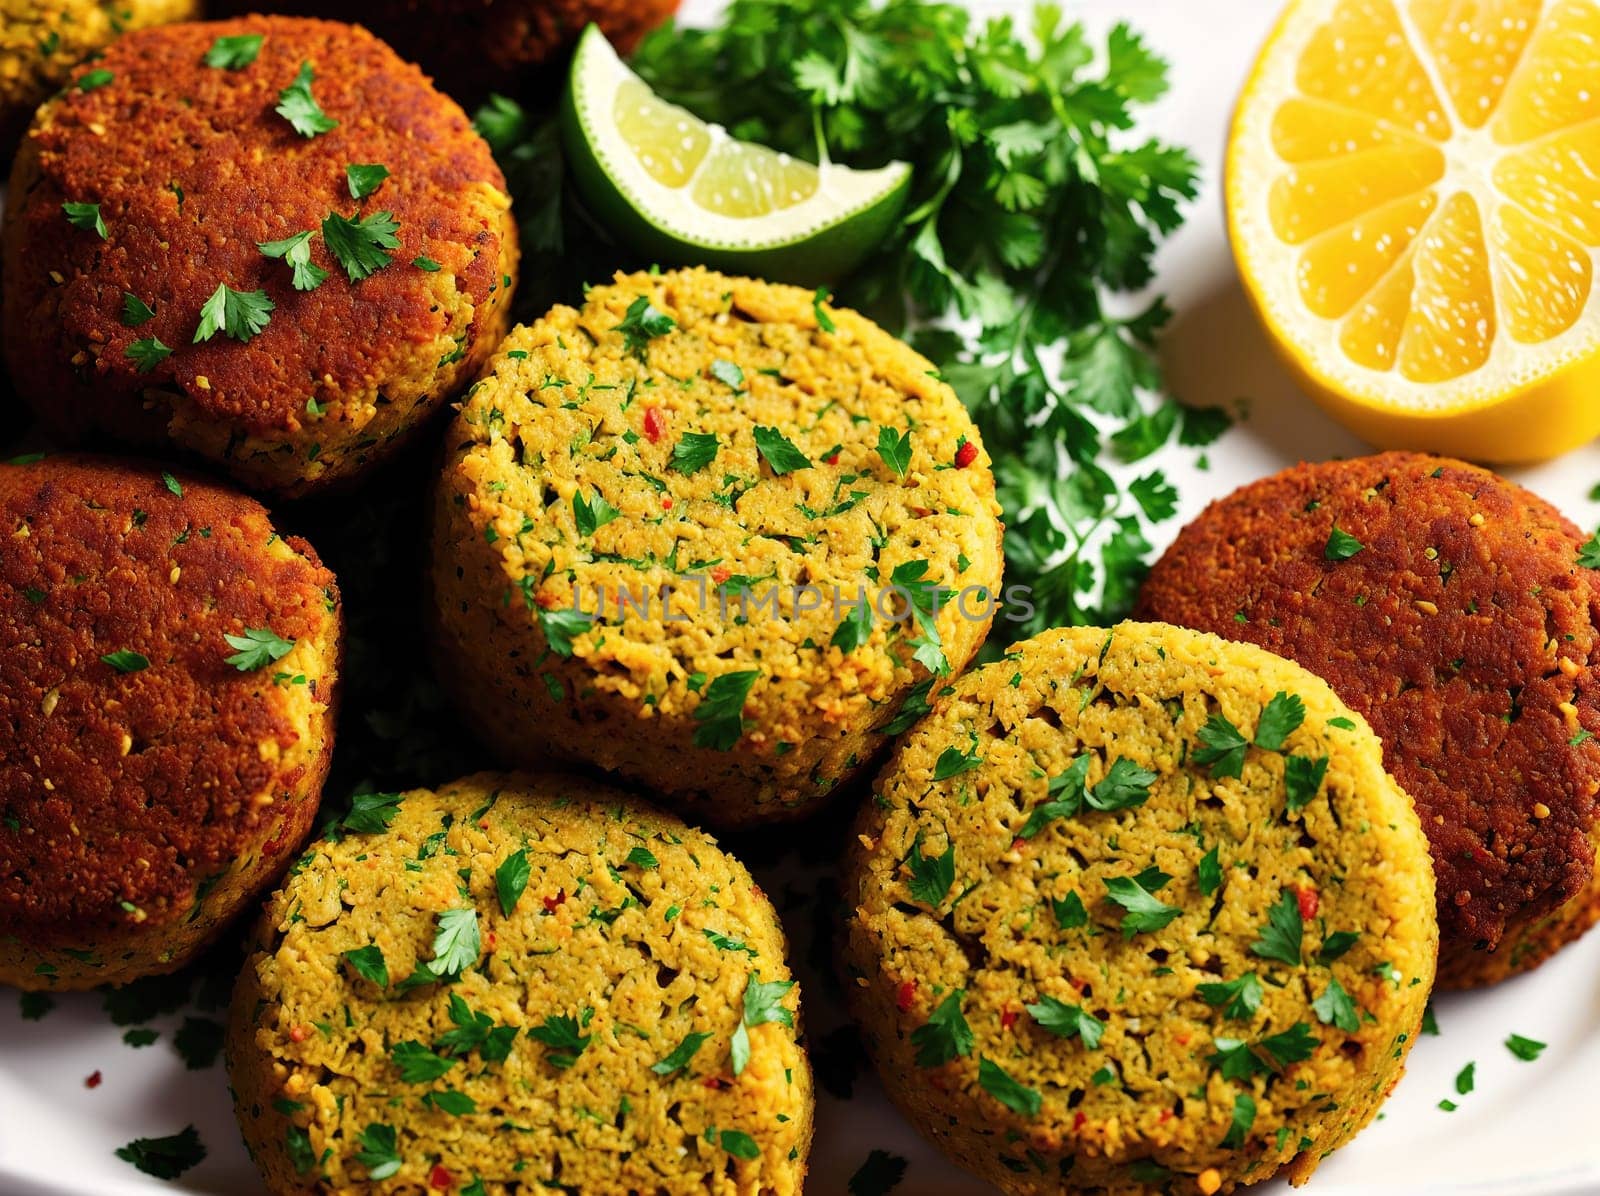 The image shows a plate of fish cakes with lemon wedges and parsley on top.